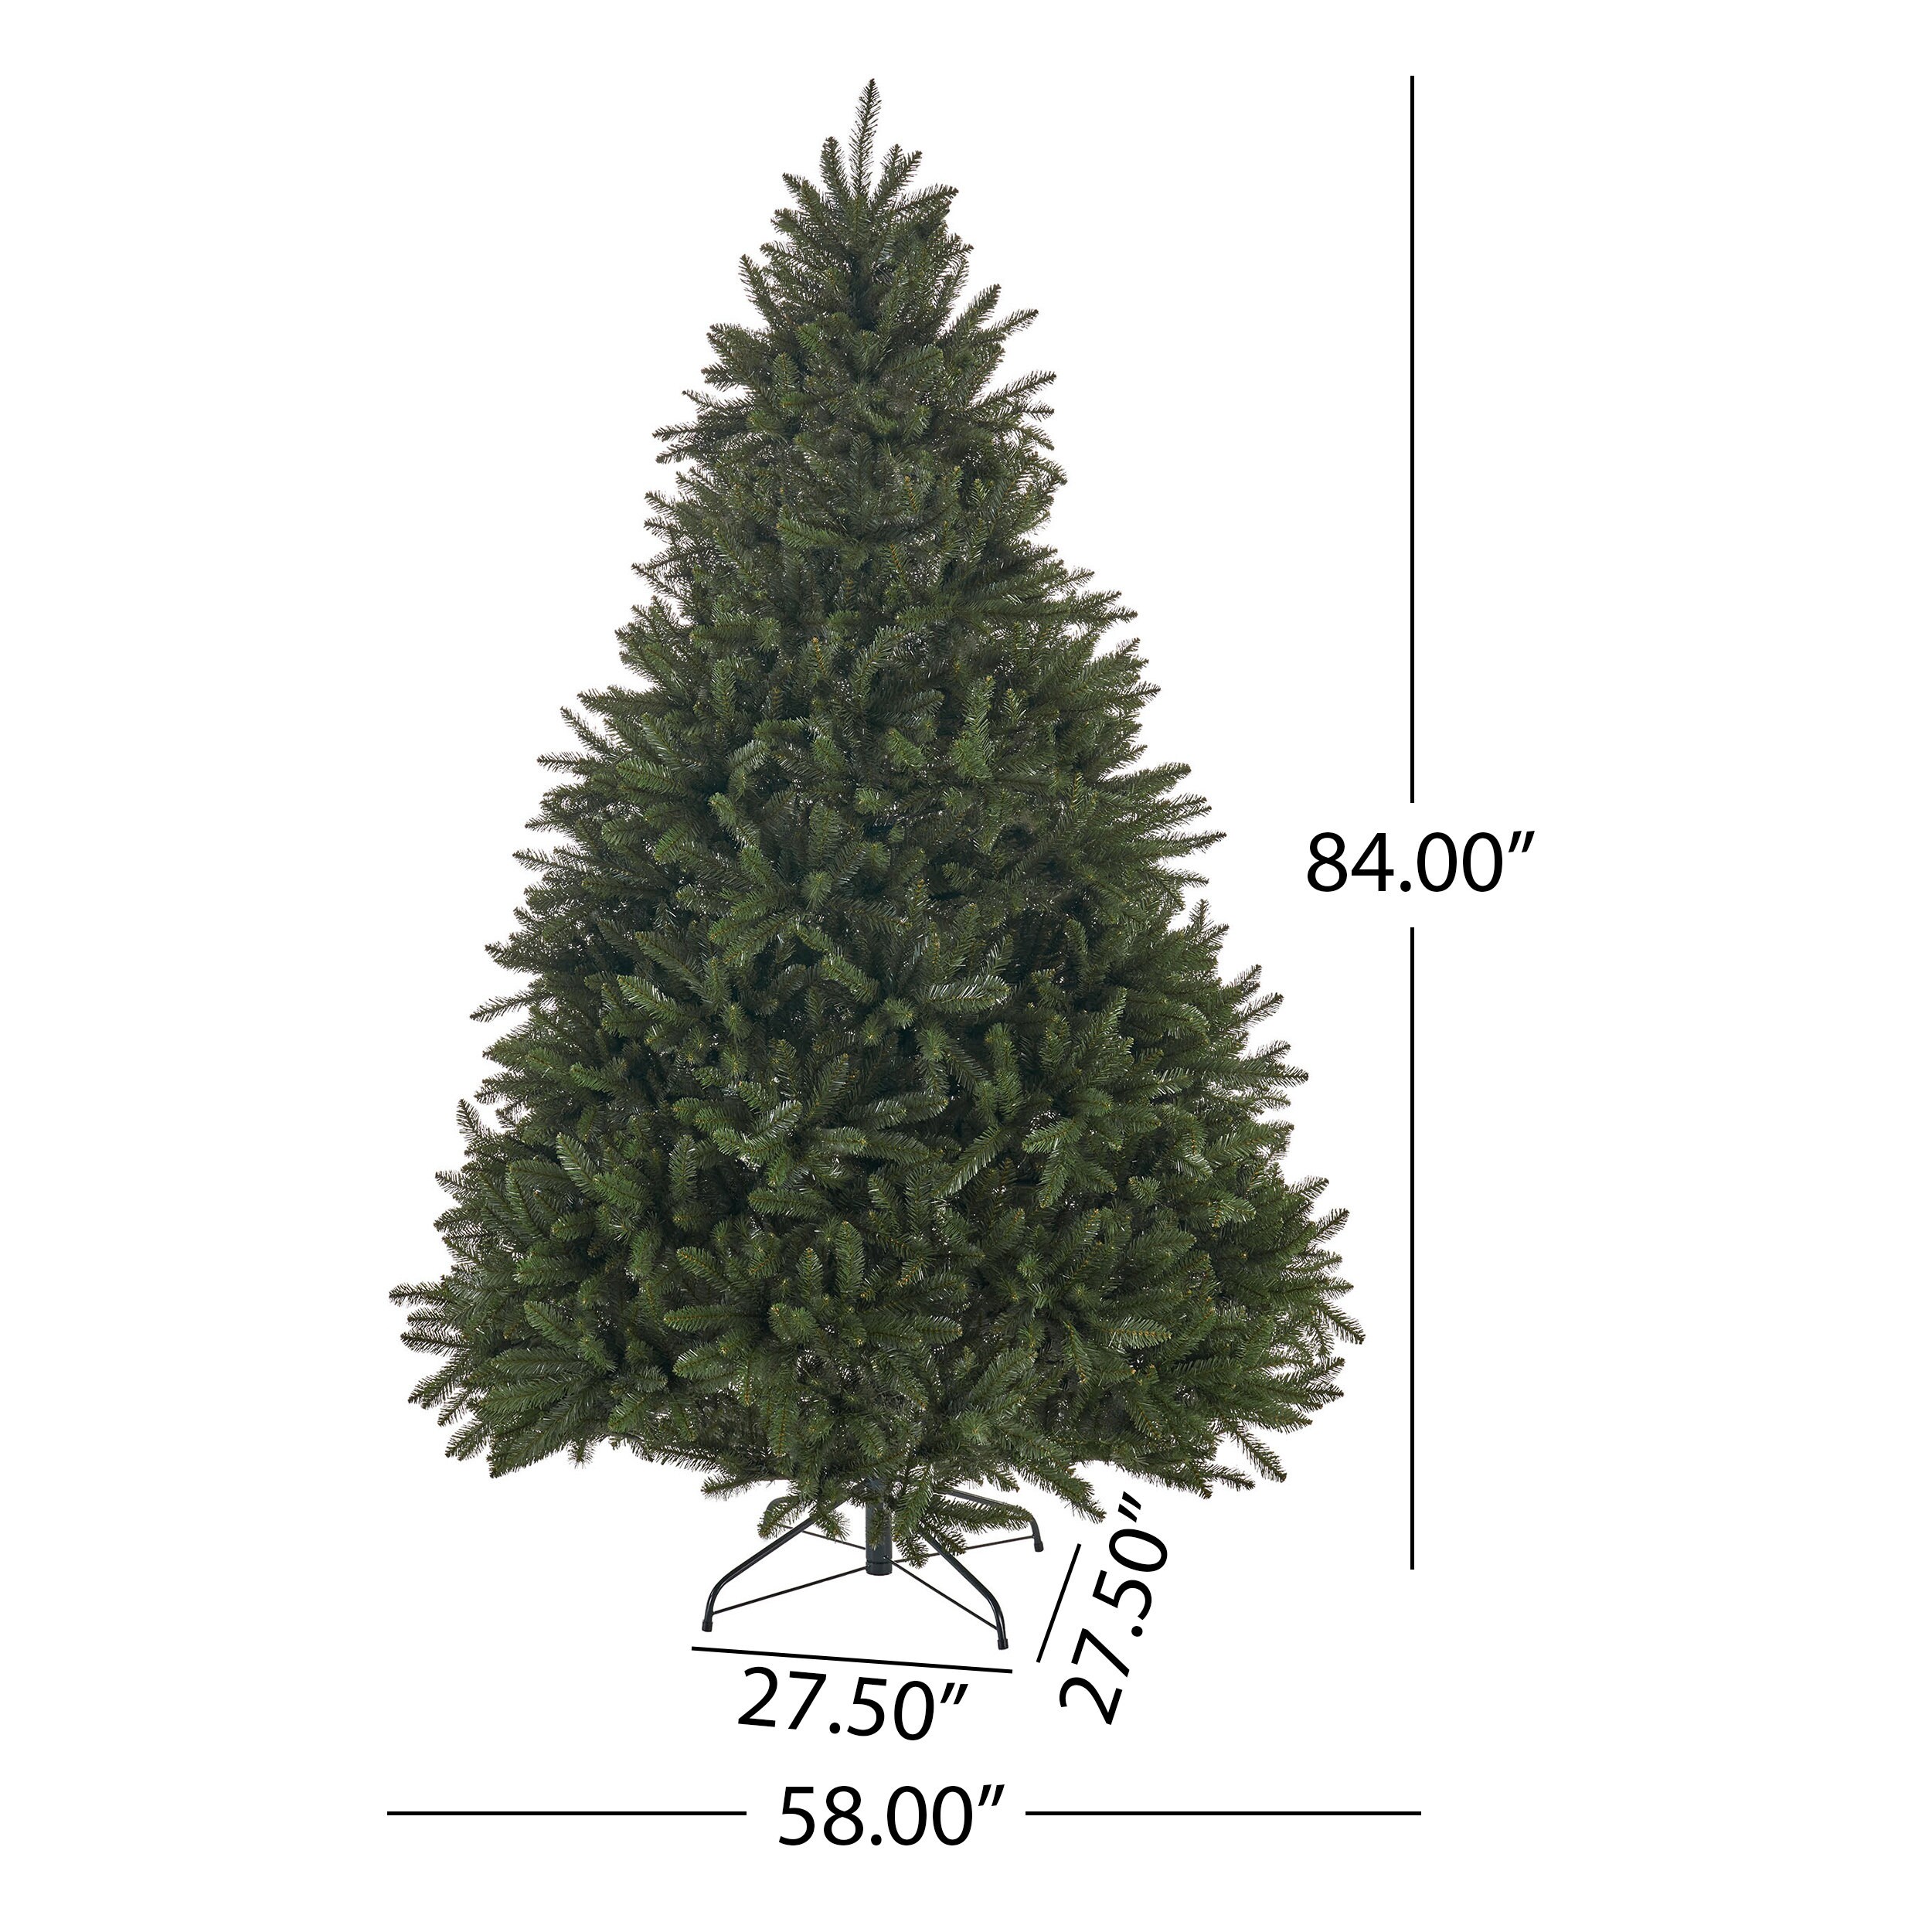 Best Selling Home Decor 7-ft Norway Spruce Artificial Christmas Tree in ...